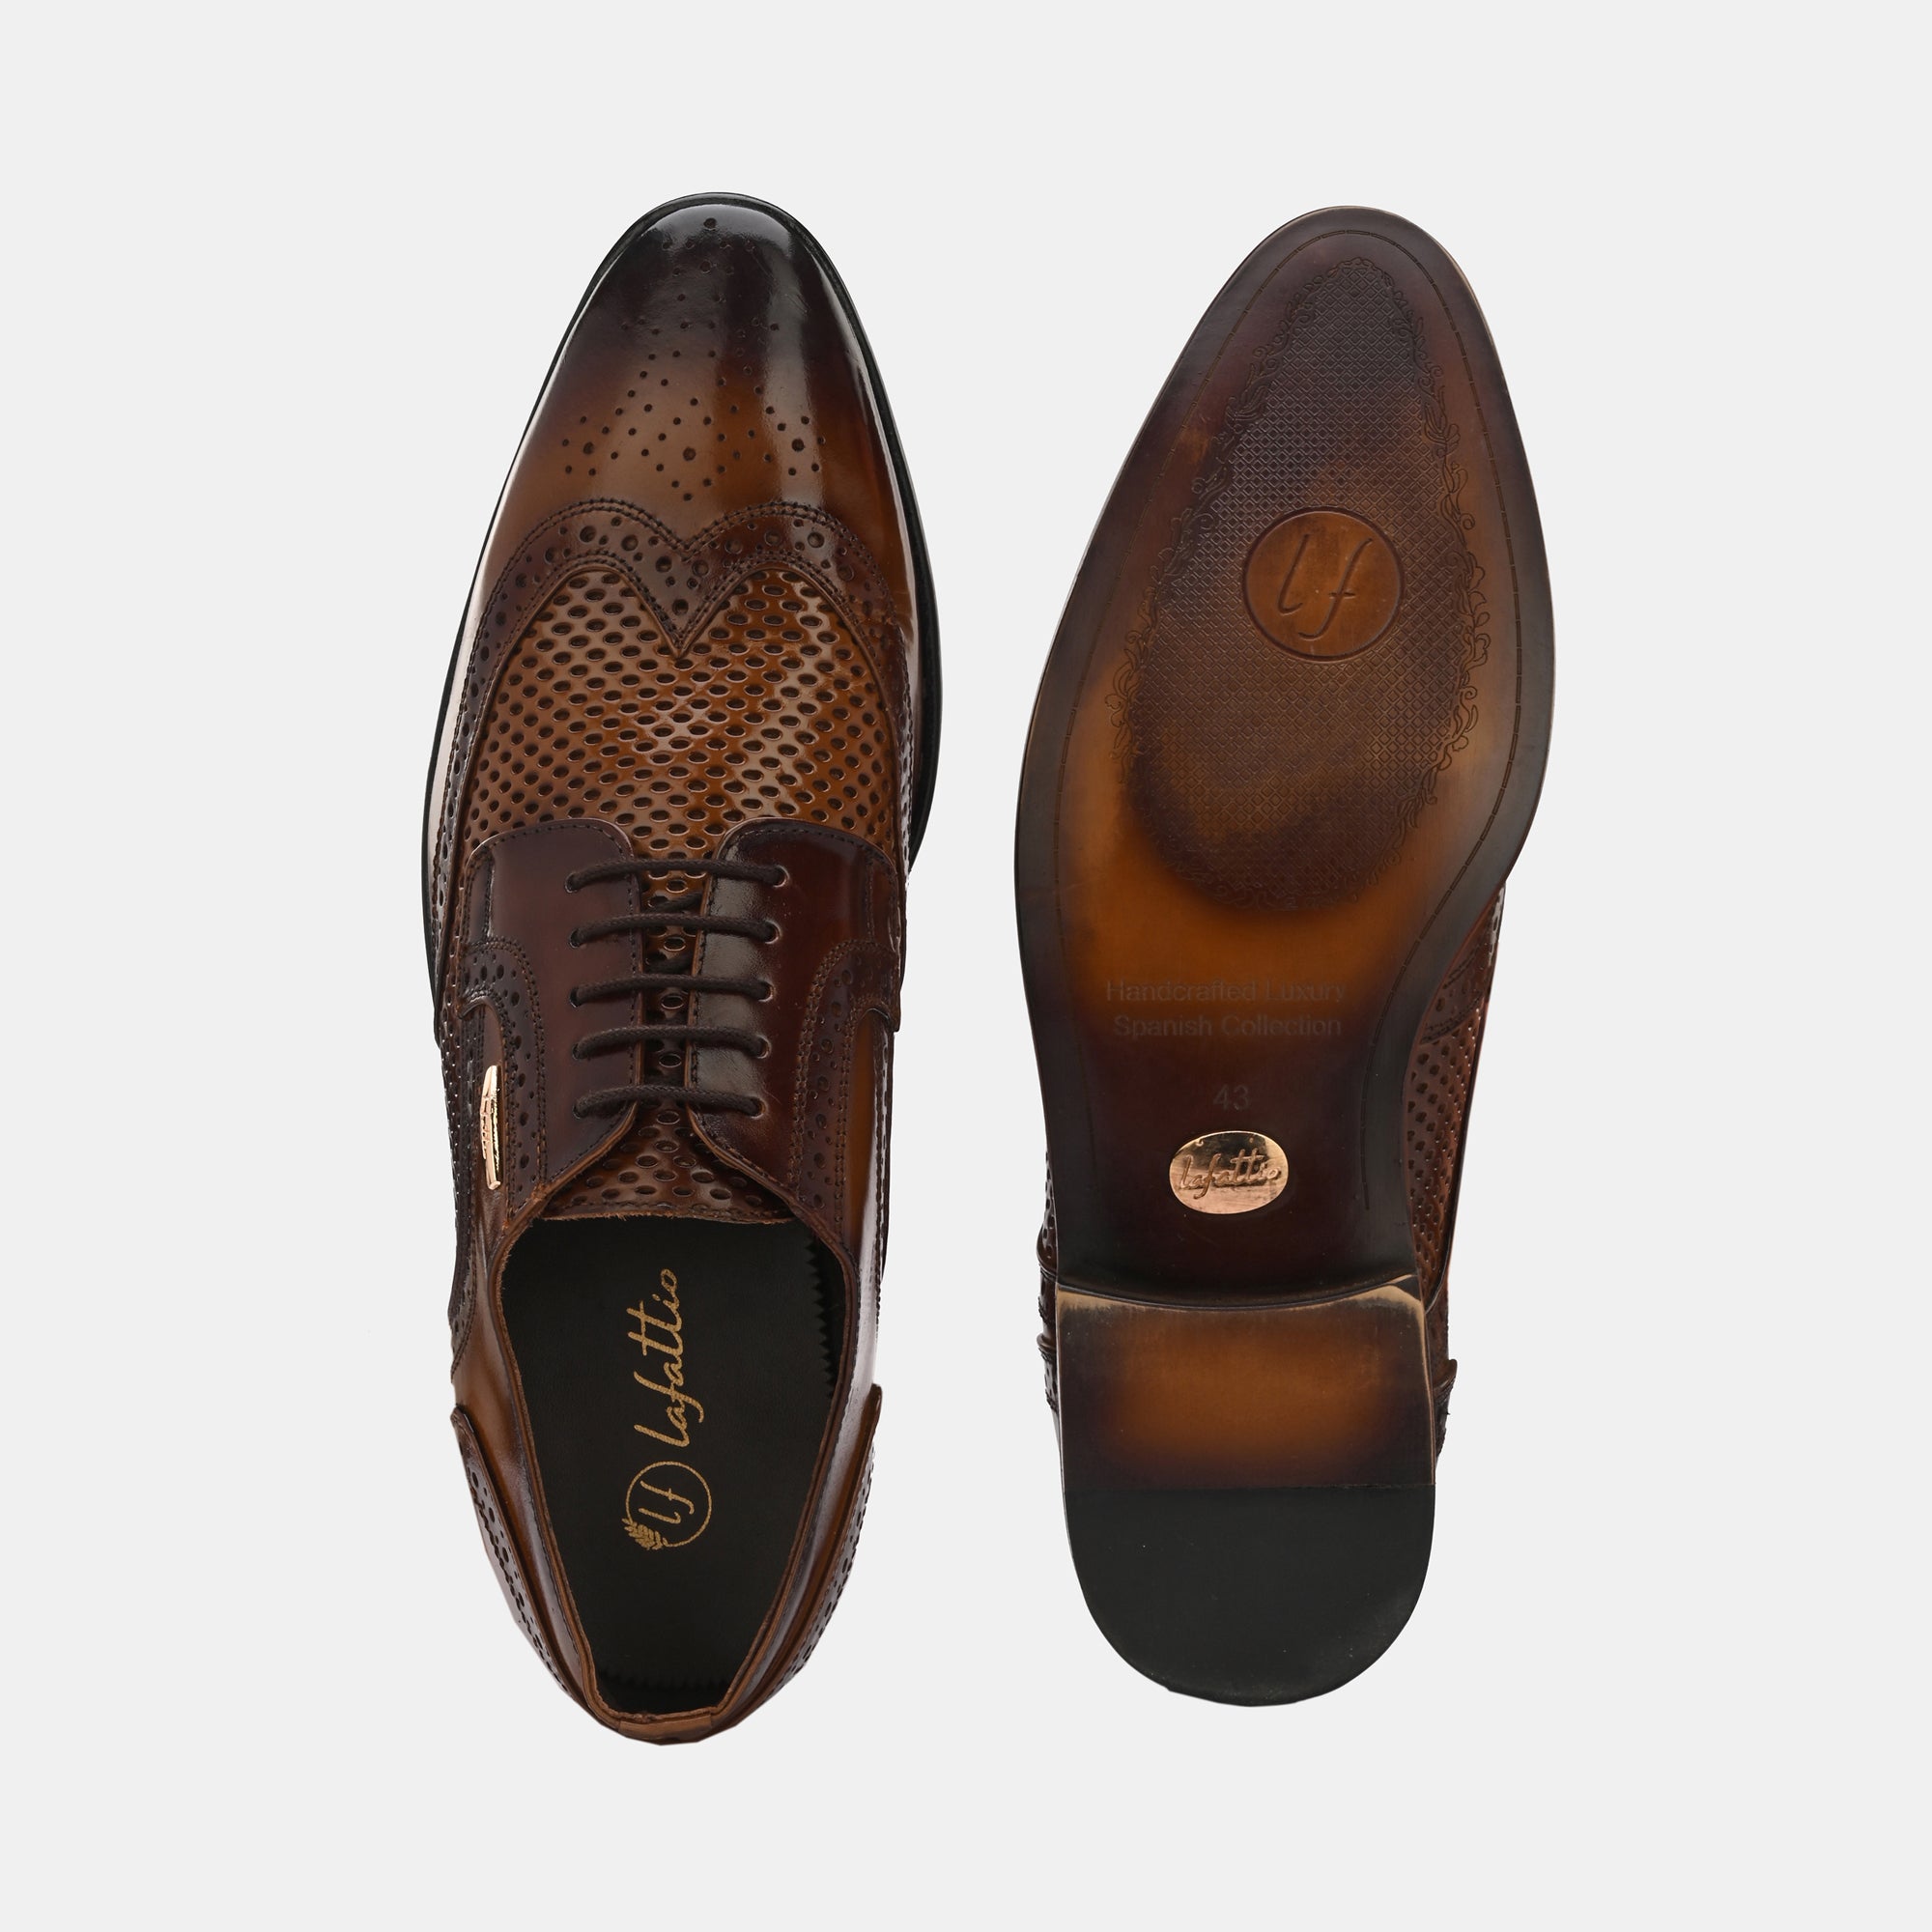 Tan Lace-Up Brogues by Lafattio